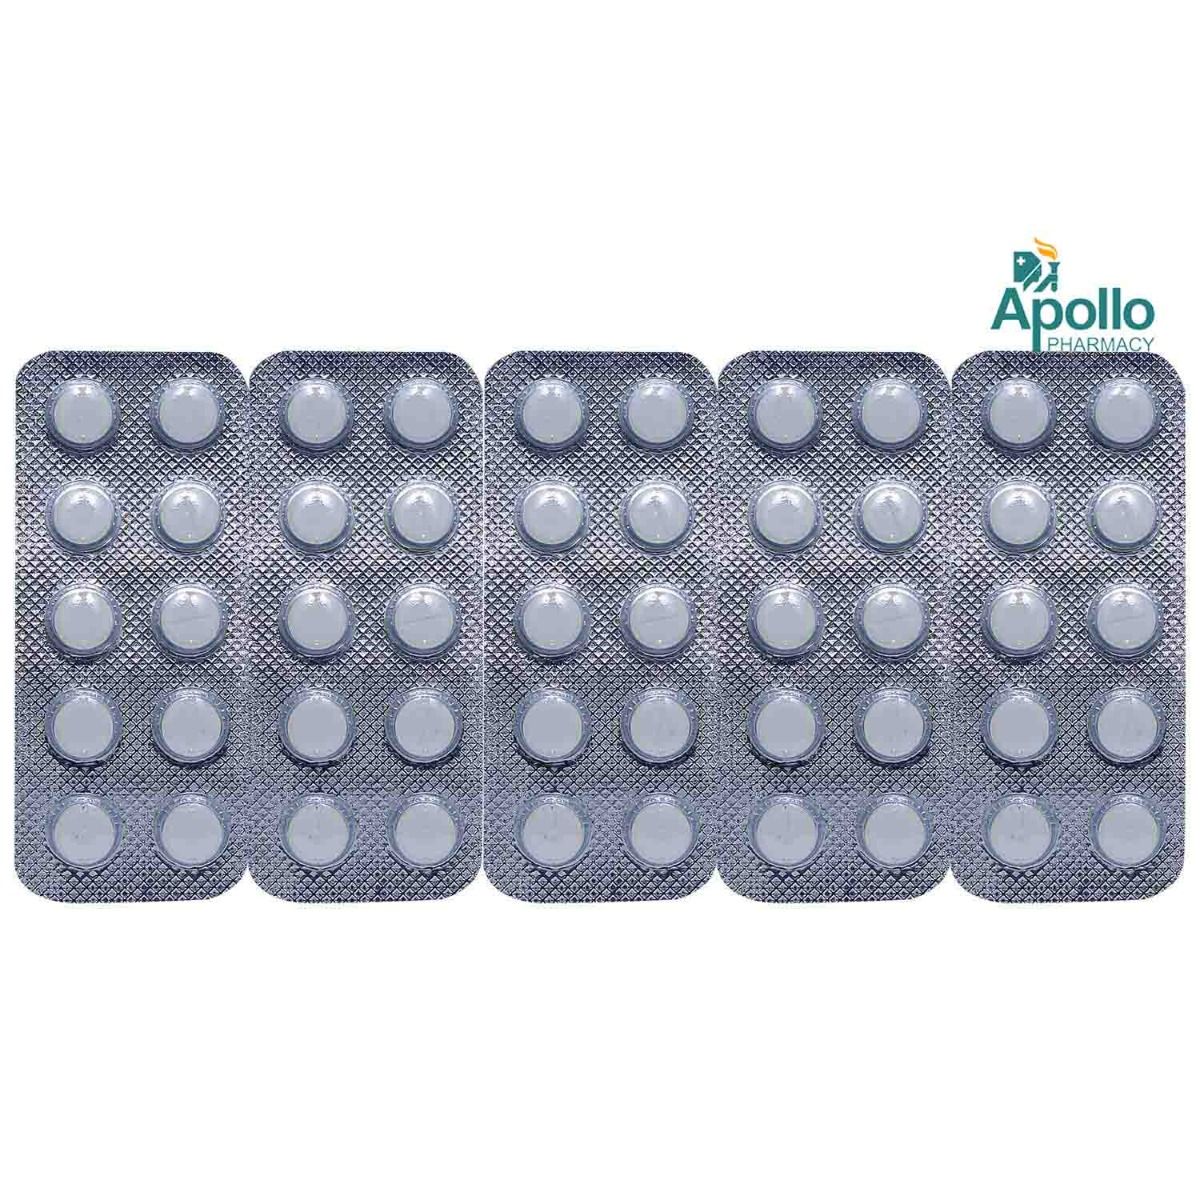 NEBIPIL 2.5MG TABLET, Pack of 10 TABLETS